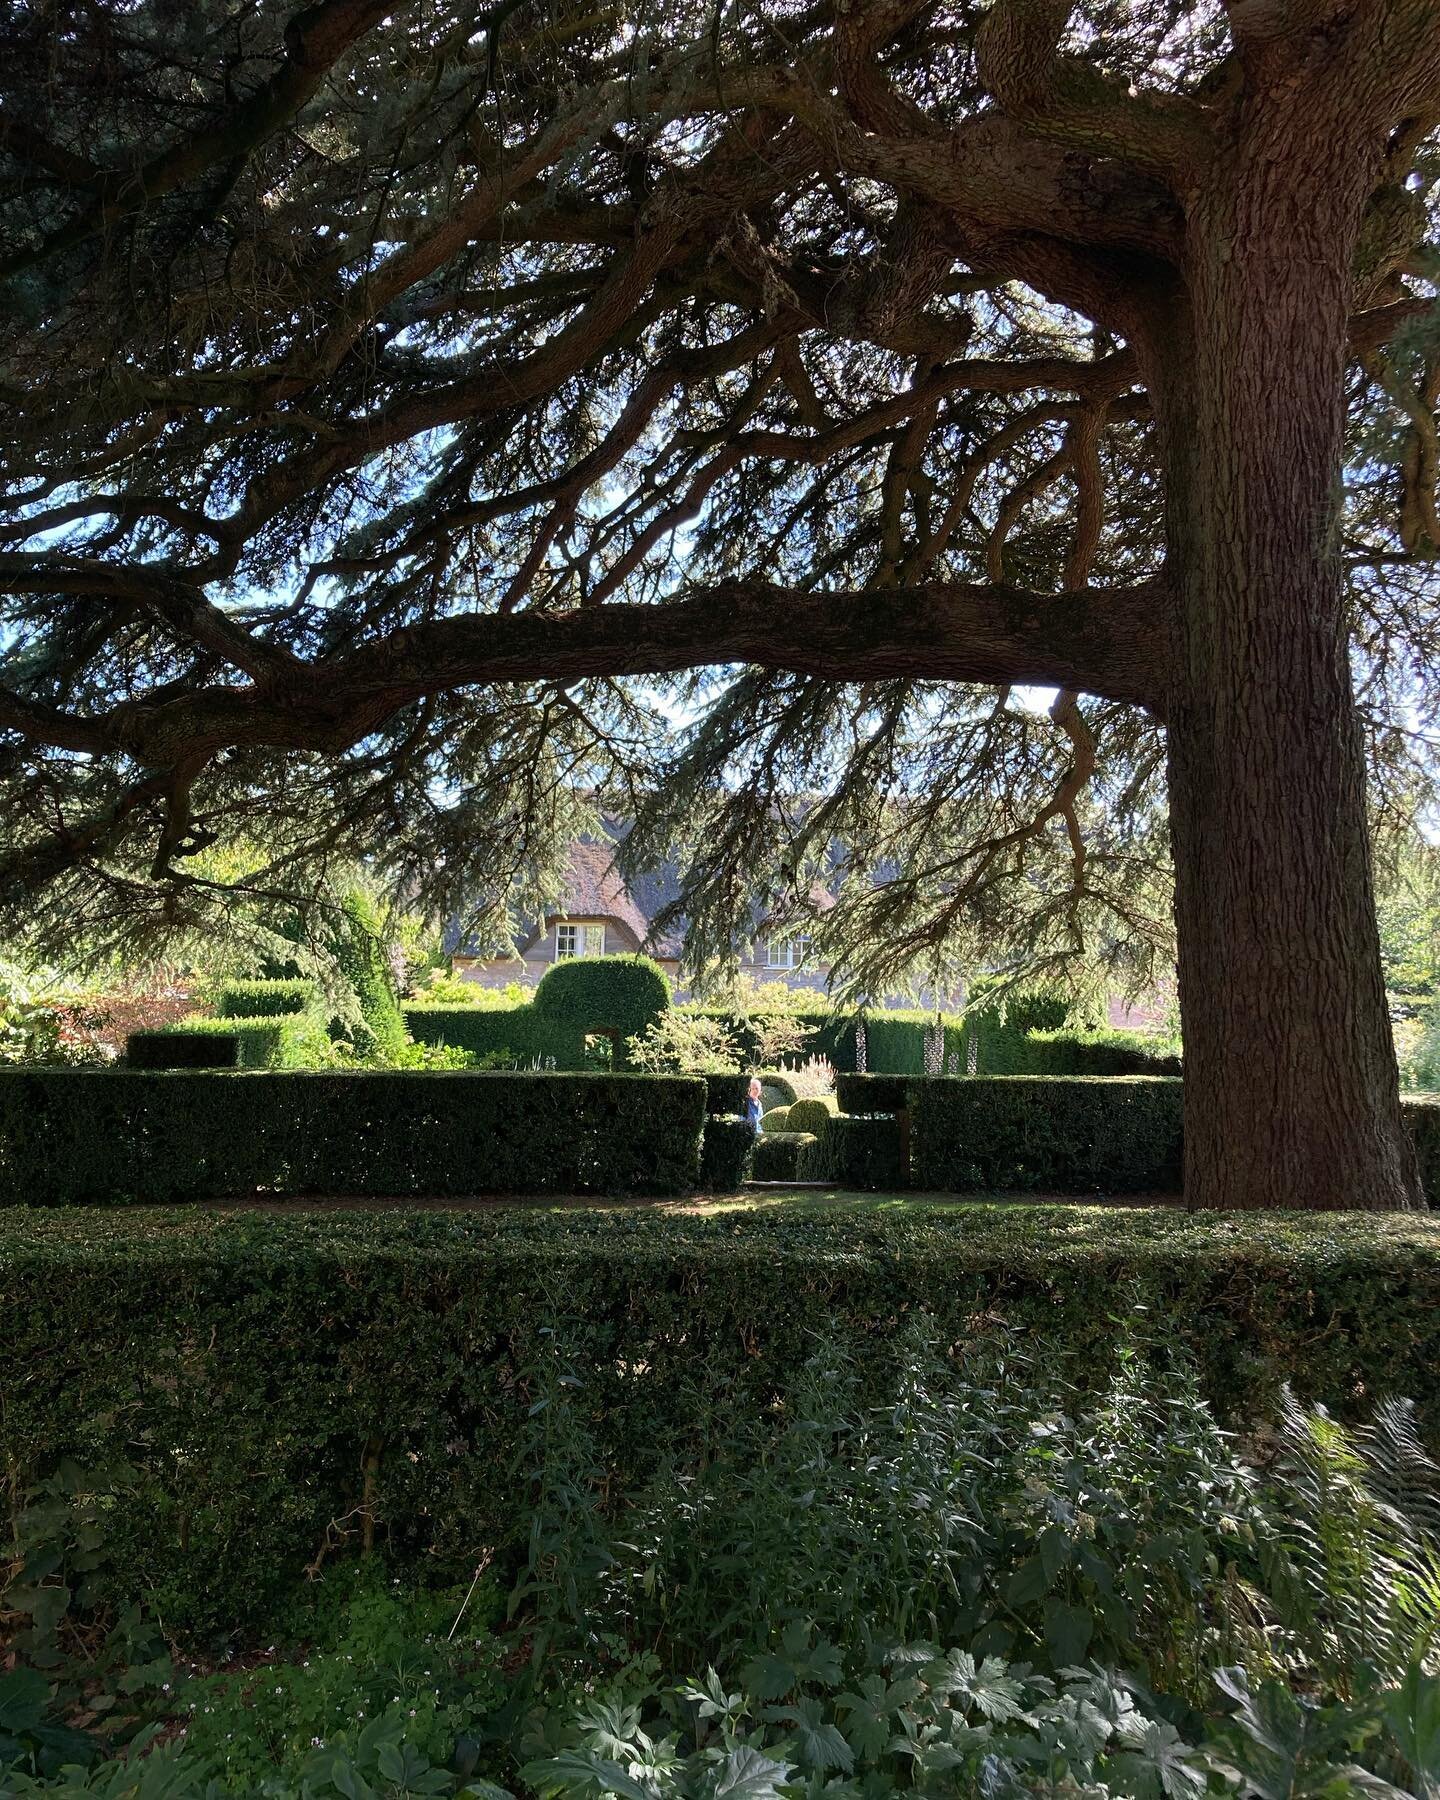 Hidcote Manor Garden - inspiration for many projects&hellip;great to be back again.